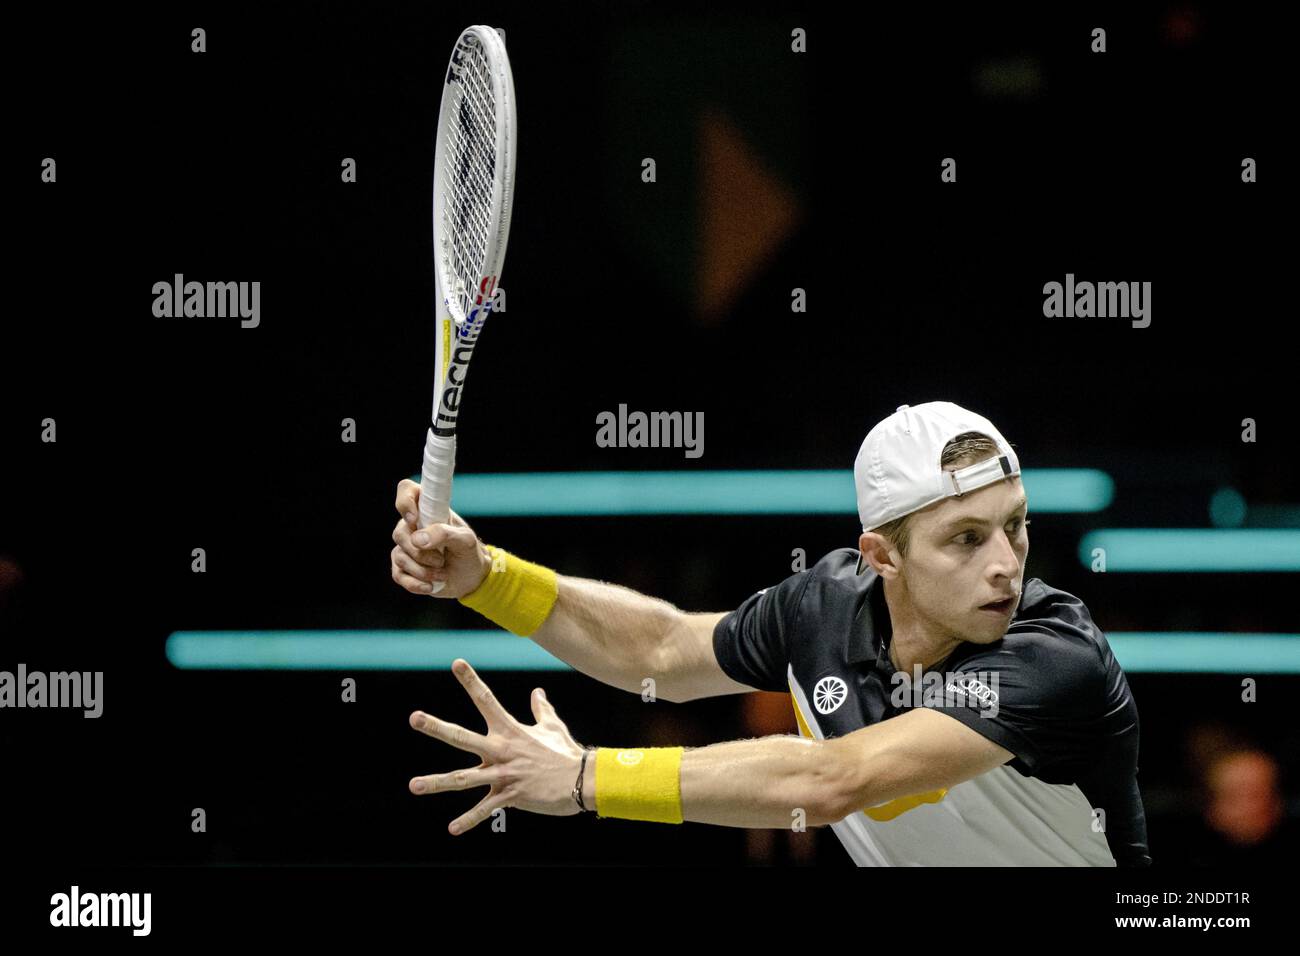 Ahoy, Rotterdam, Netherlands. 15th Feb, 2023. ROTTERDAM - Tallon Grepe  (NED) in action against Alexander Zverev (GER) on the third day of the ABN  AMRO Open tennis tournament in Ahoy. AP SANDER